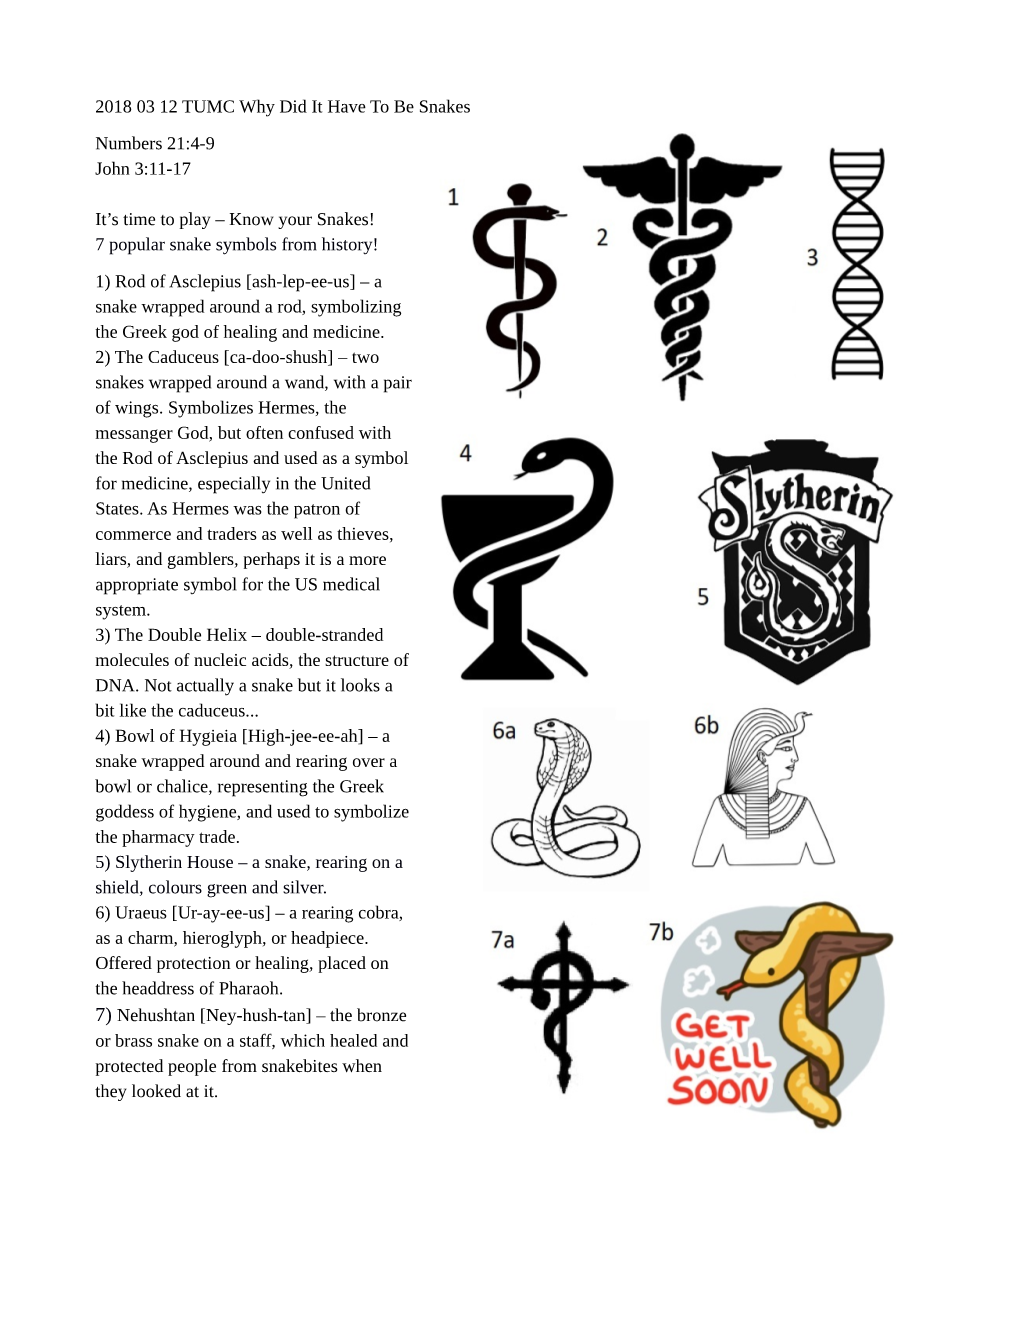 Know Your Snakes! 7 Popular Snake Symbols from History!